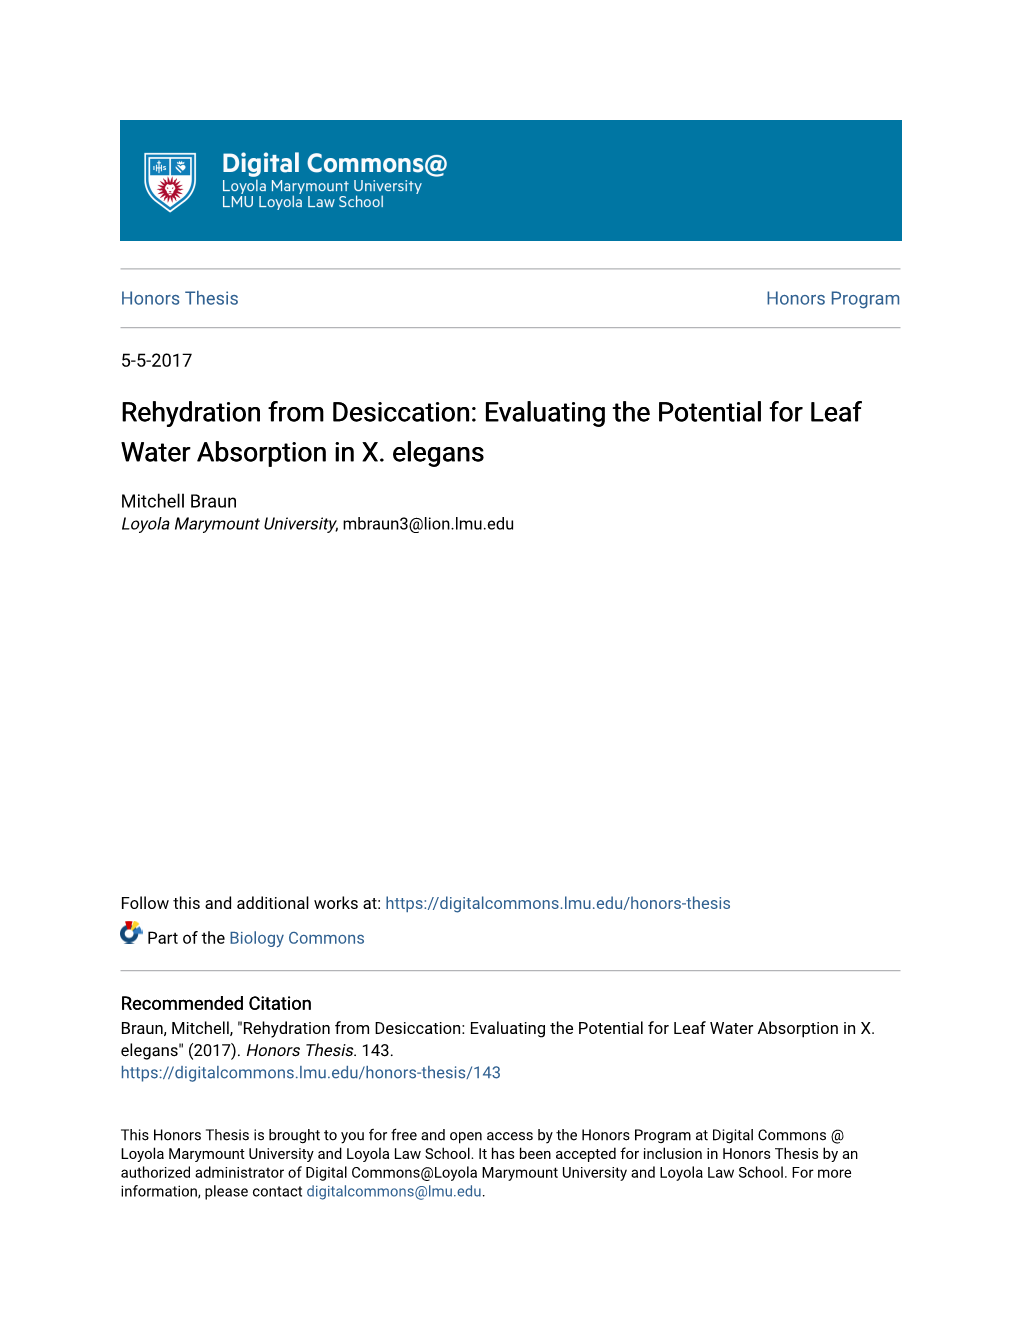 Rehydration from Desiccation: Evaluating the Potential for Leaf Water Absorption in X. Elegans